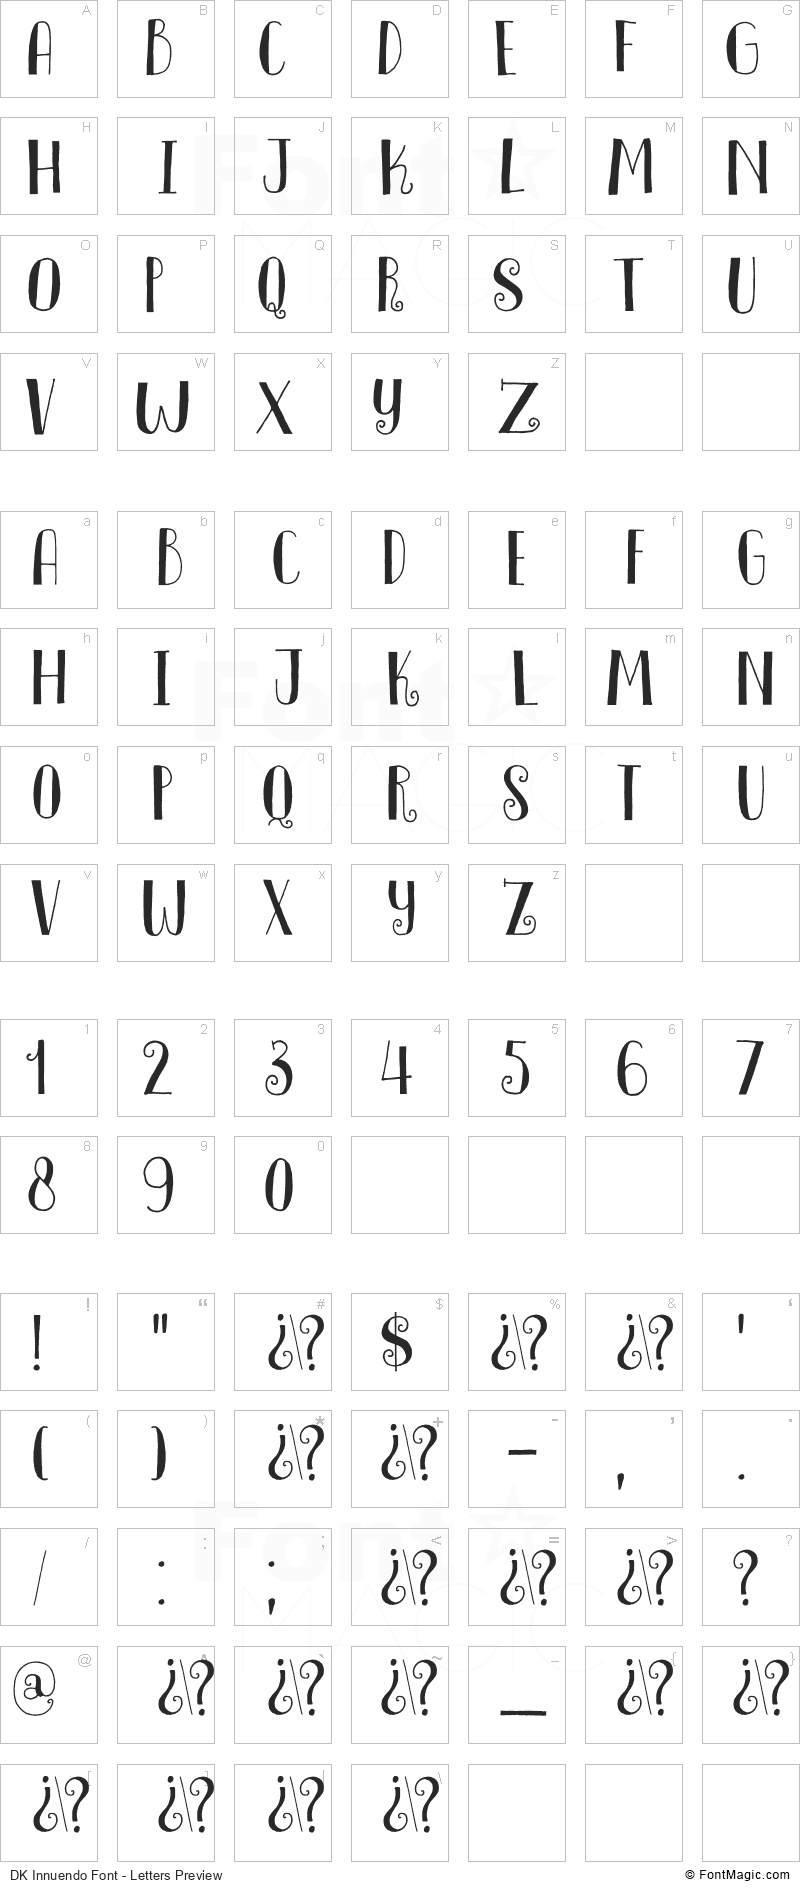 DK Innuendo Font - All Latters Preview Chart